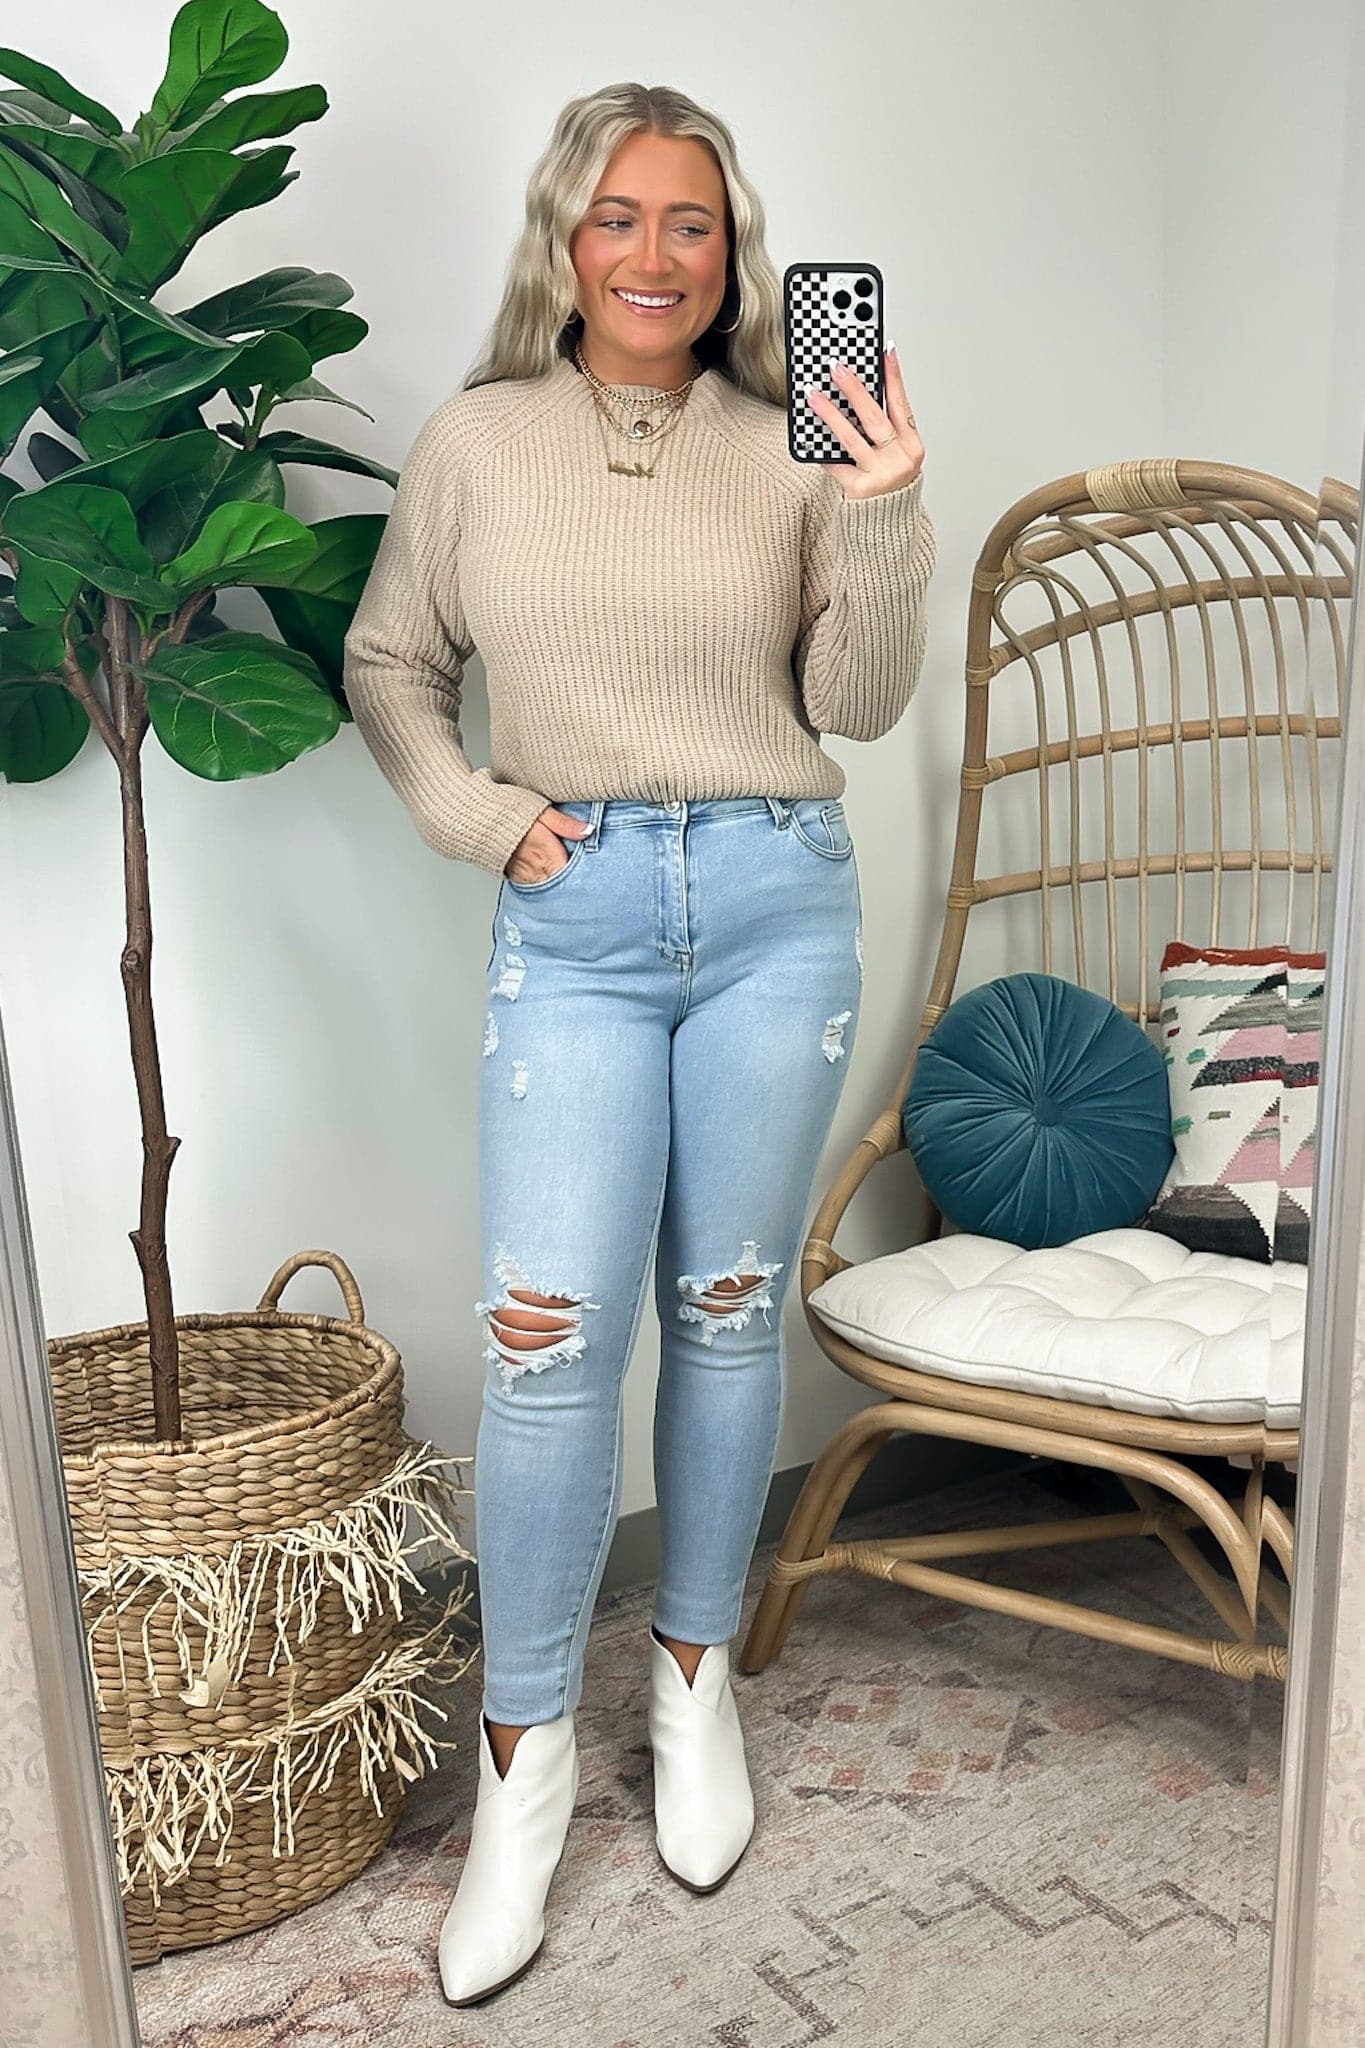  Clarasie Knit Pullover Sweater - FINAL SALE - Madison and Mallory